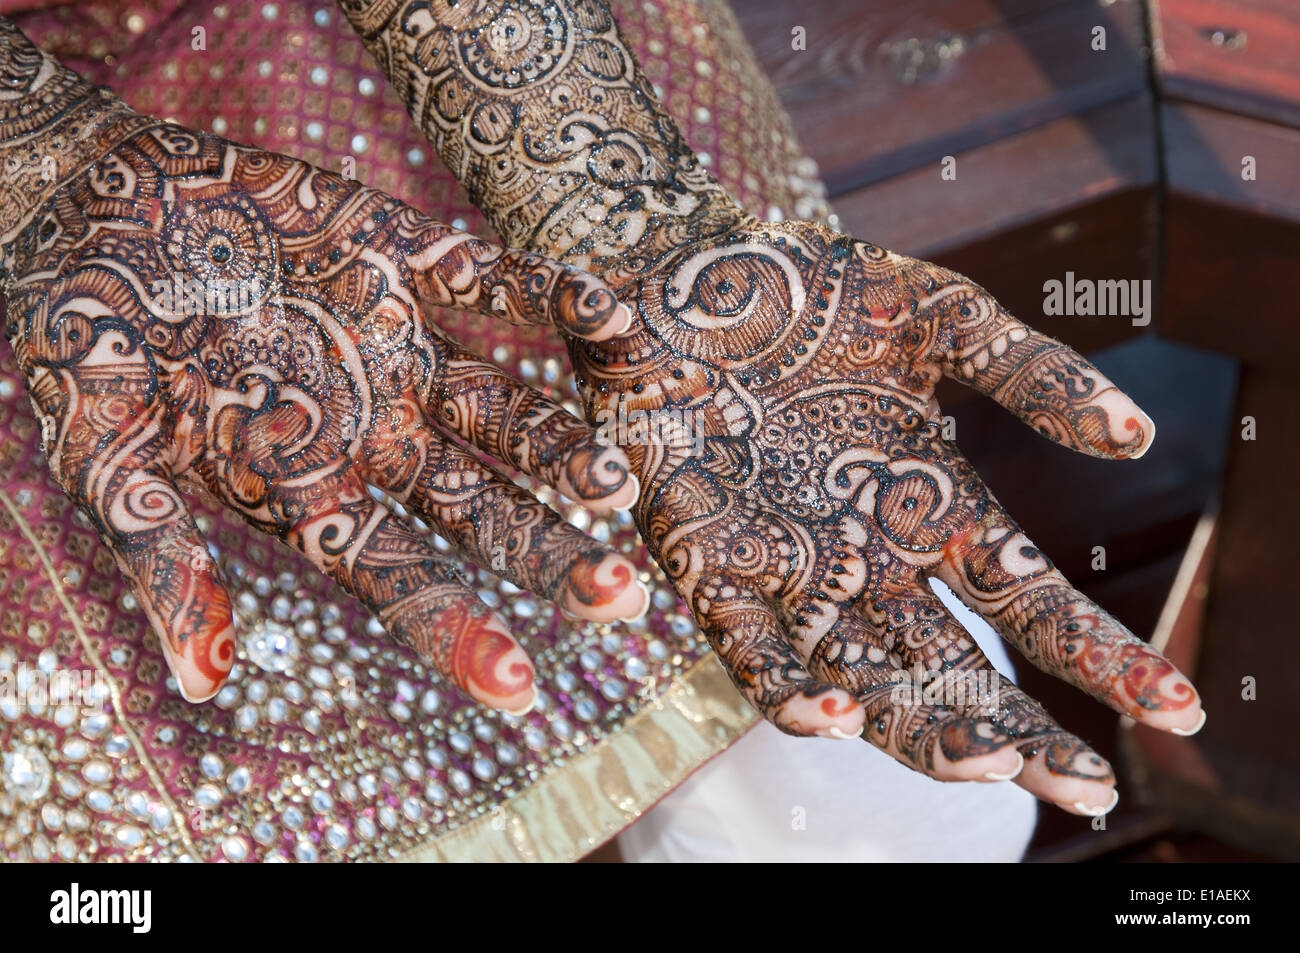 Indian bride to be getting her arms and legs decorated with henna at a ...